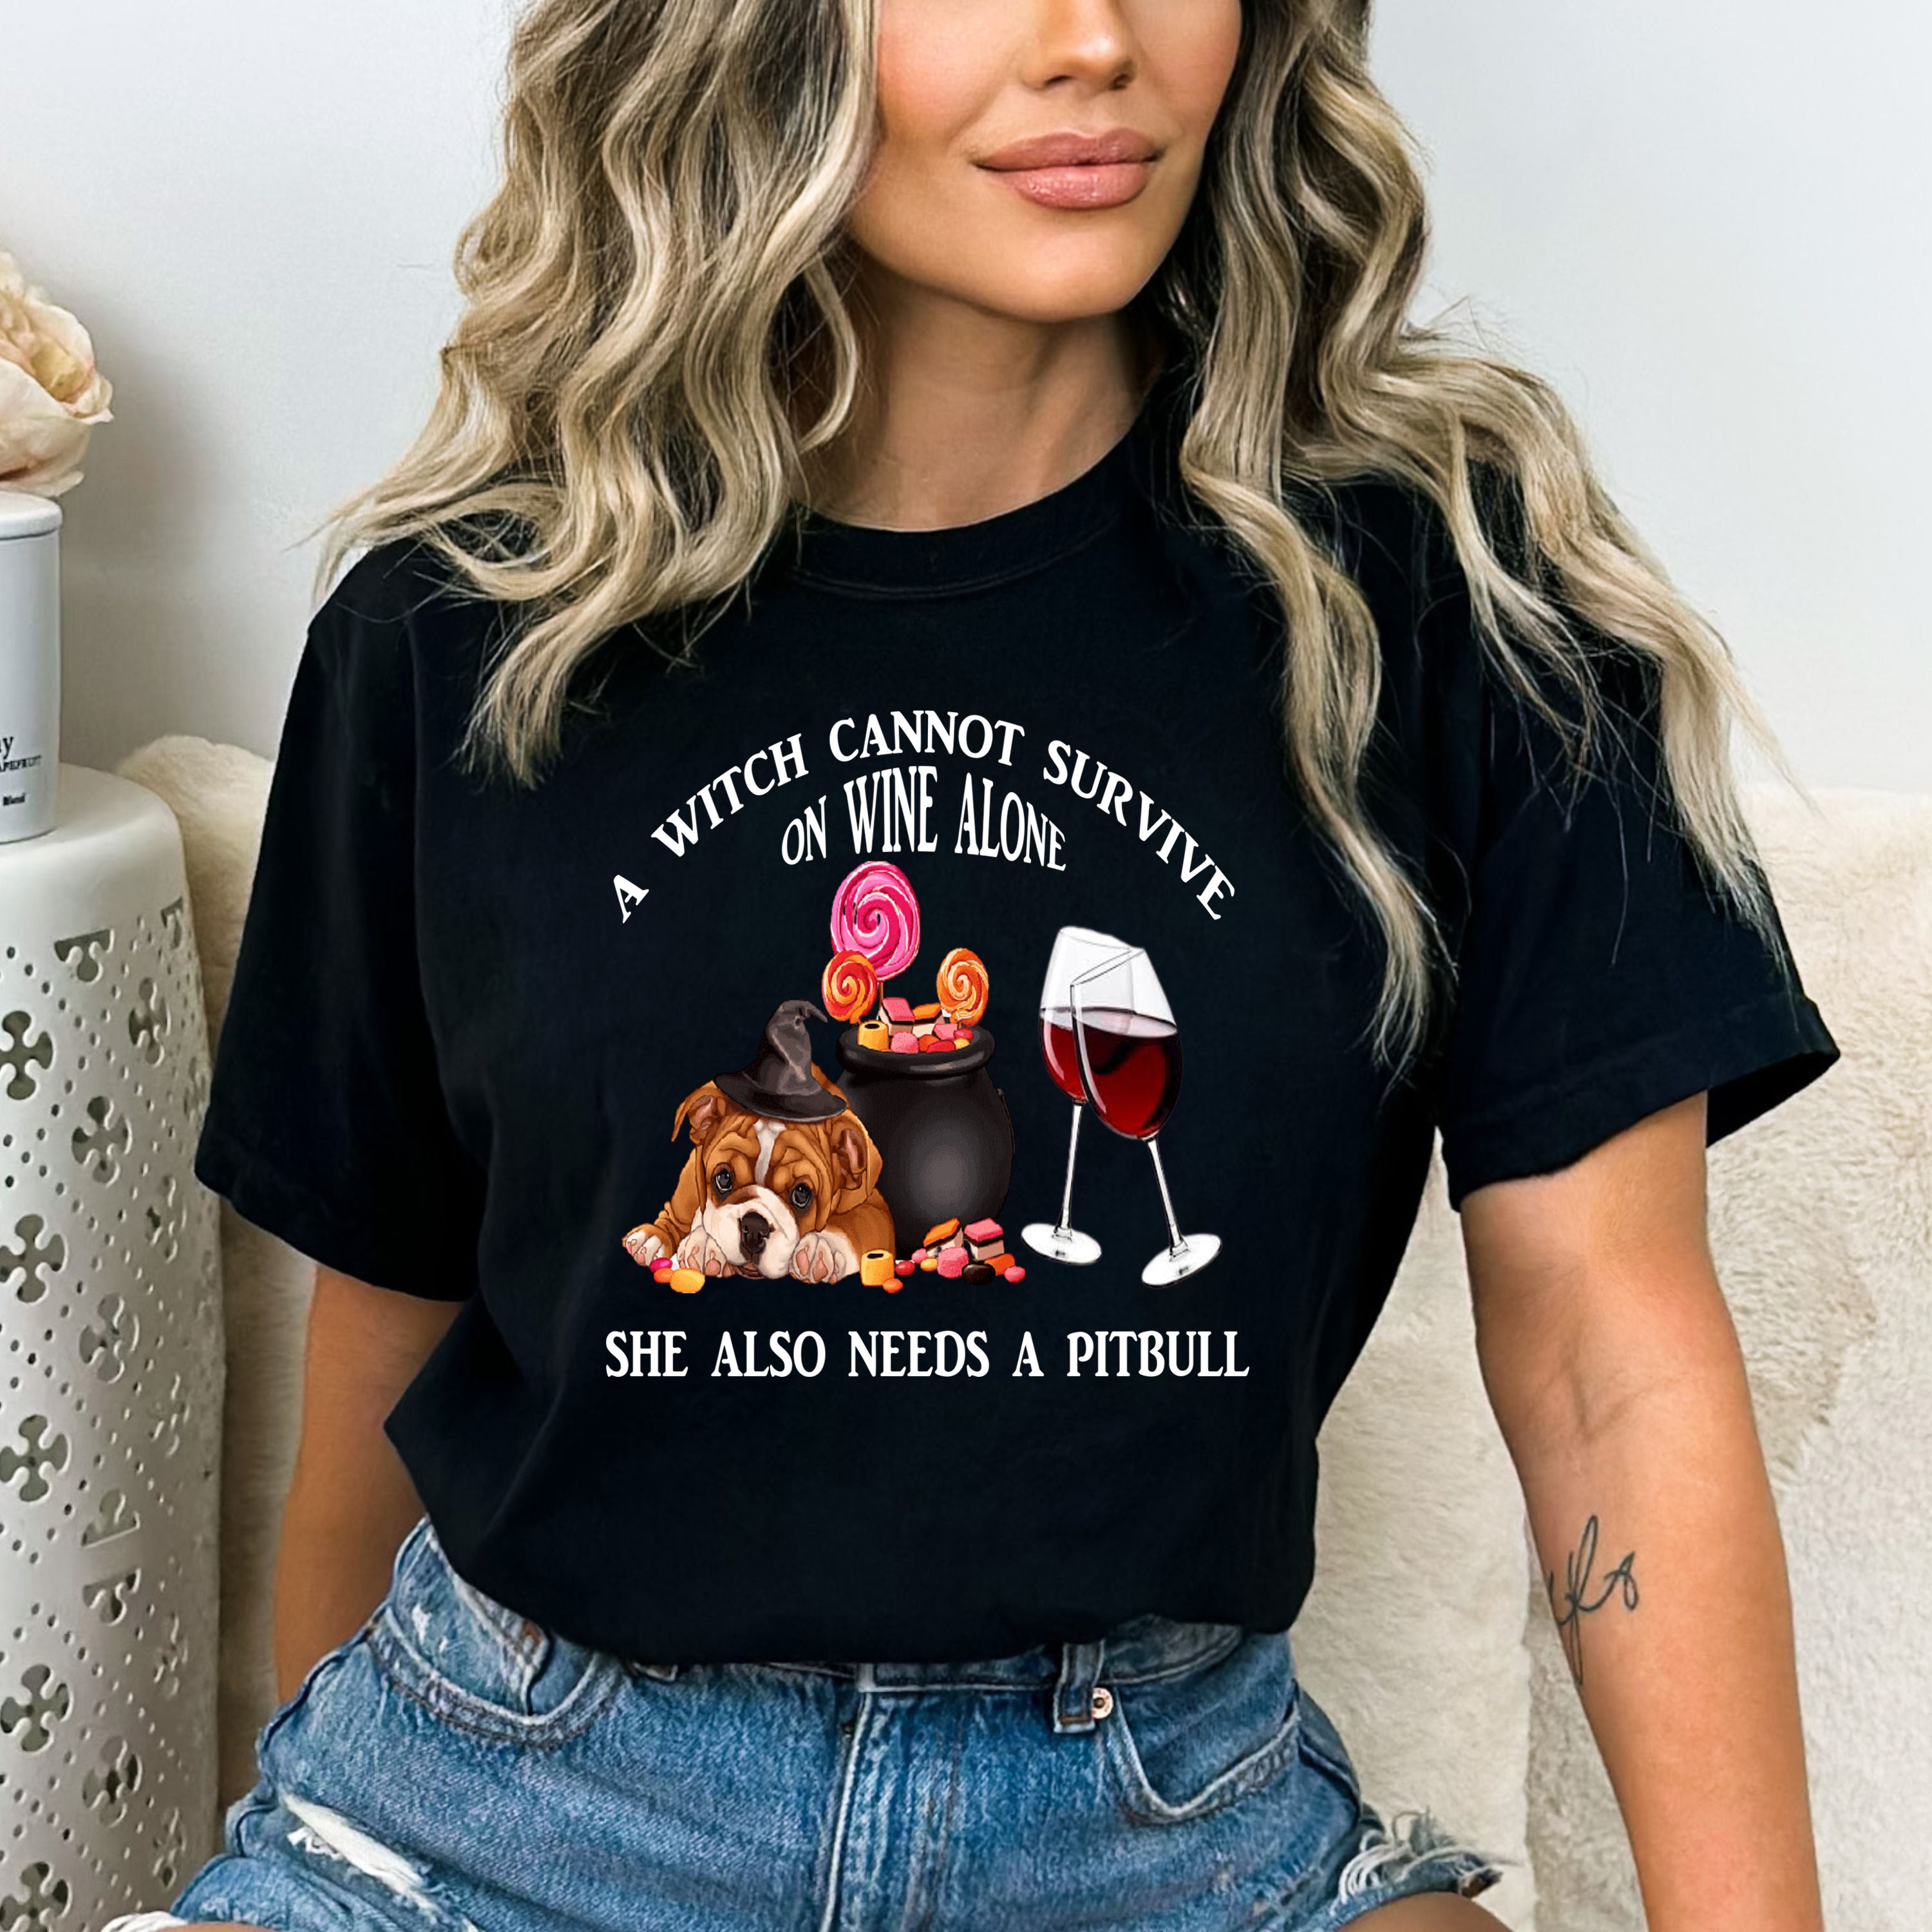 "A WITCH NEEDS WINE AND PITBULL" T-SHIRT.